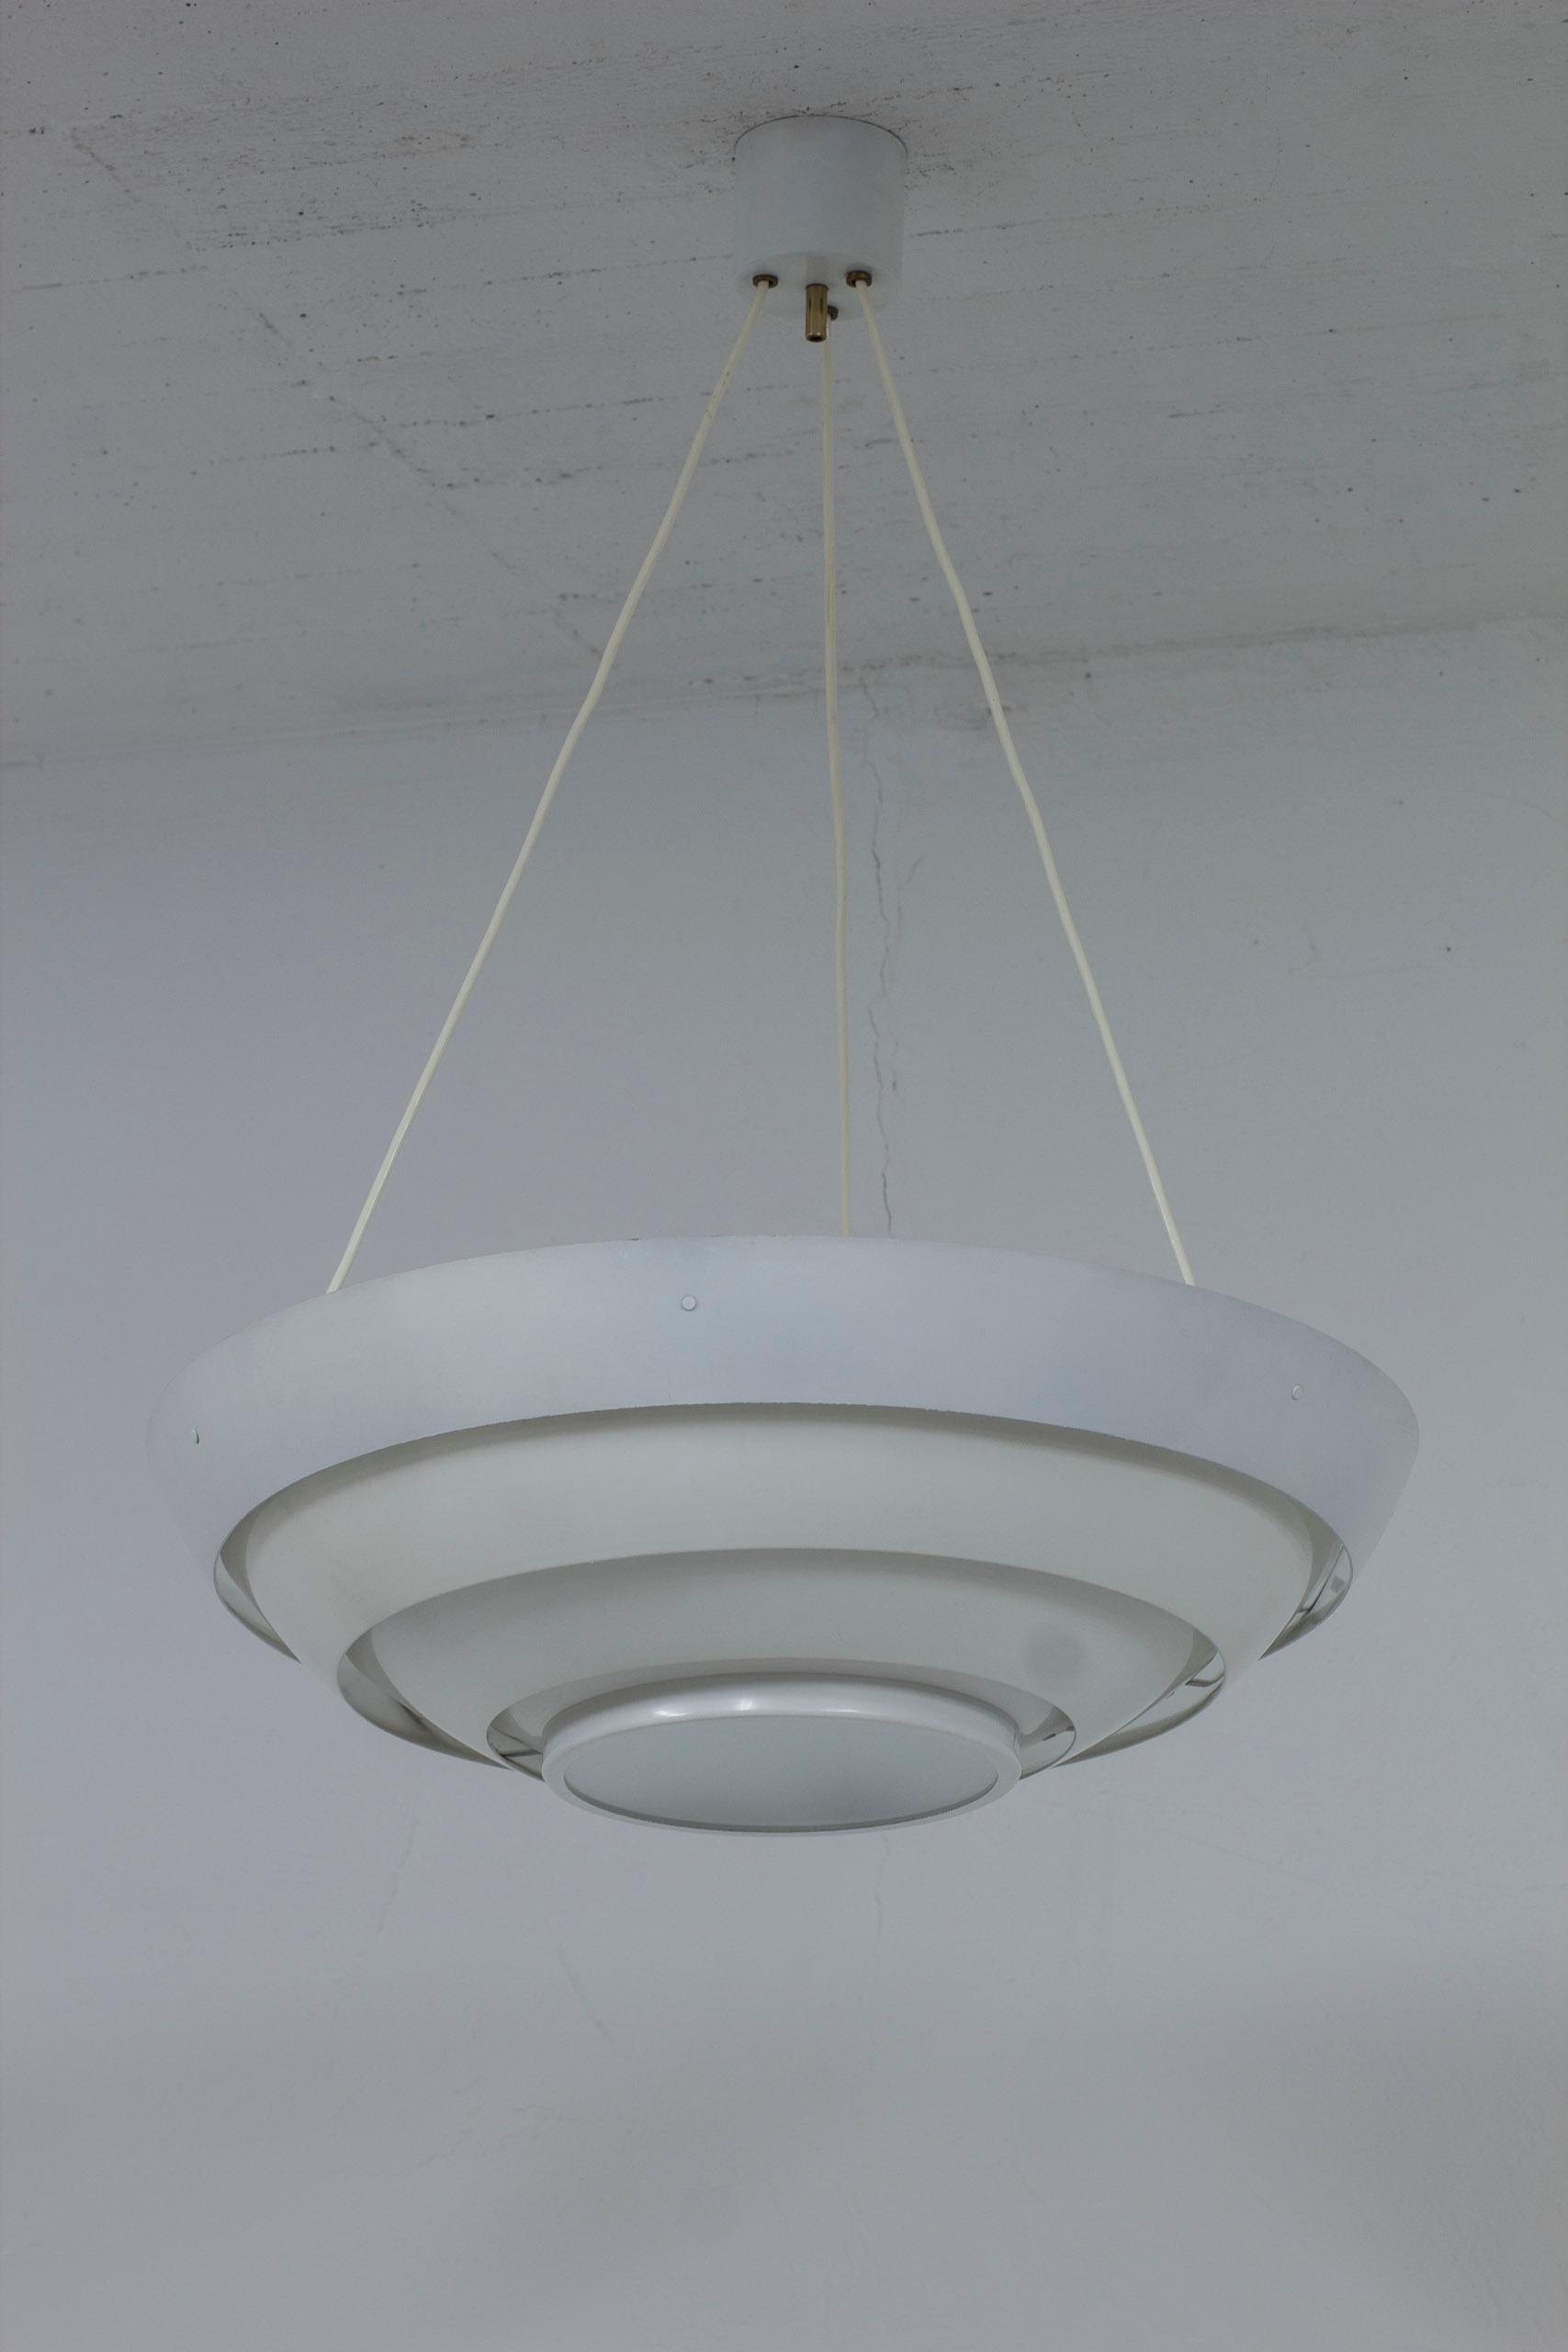 Scandinavian Modern Modernist Ceiling lamp by Hans-Agne Jakobsson, glass and metal, 1950s For Sale